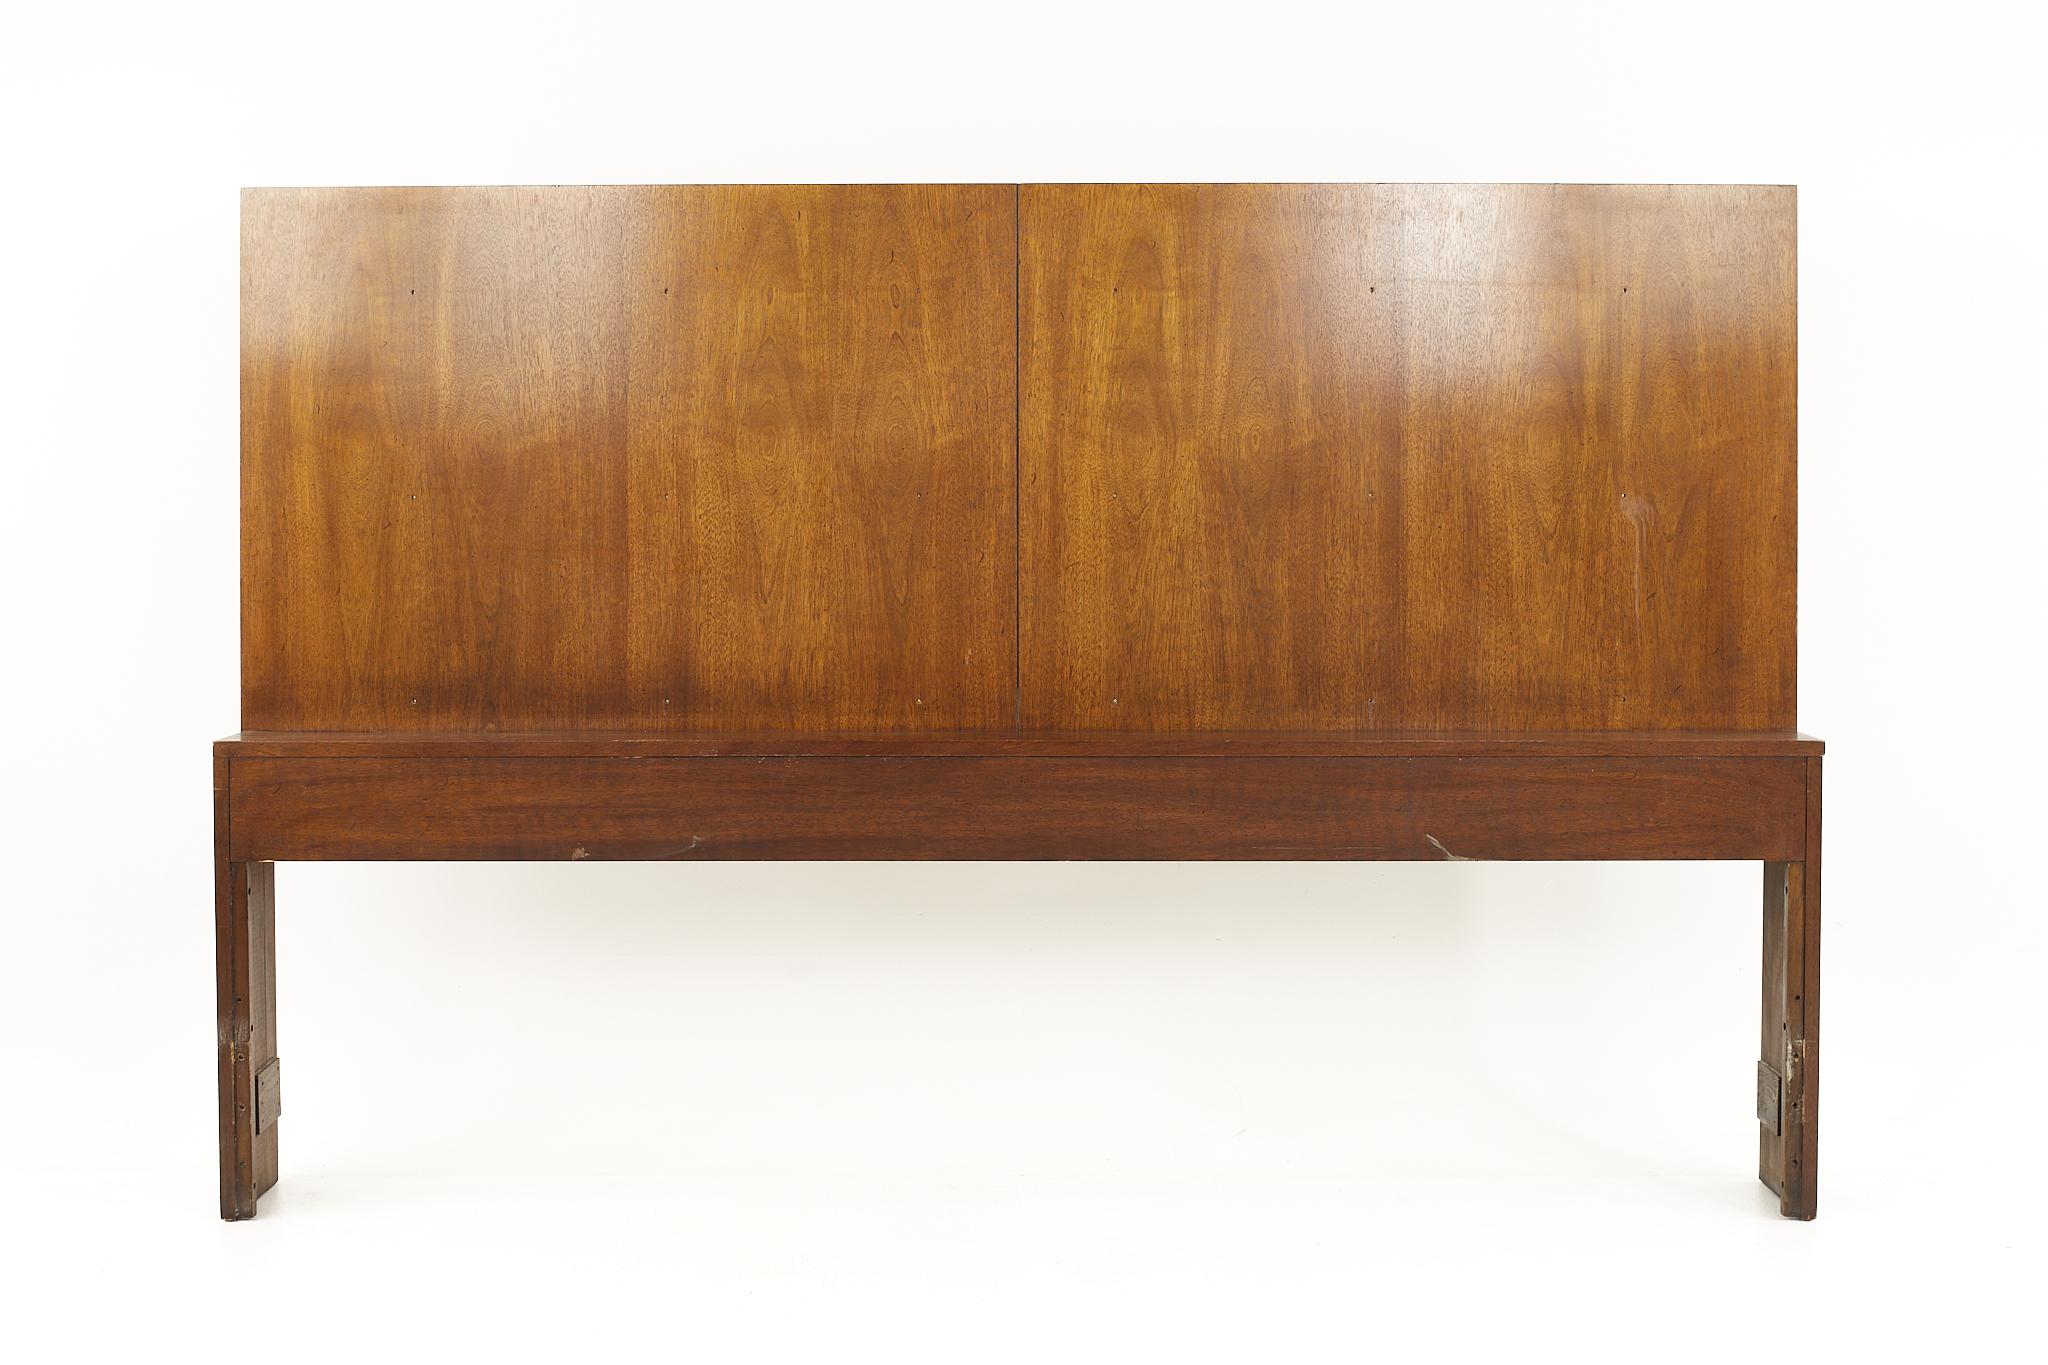 Lane mid-century walnut king headboard

The headboard measures: 80 wide x 8 deep x 52 inches high

All pieces of furniture can be had in what we call restored vintage condition. That means the piece is restored upon purchase so it’s free of